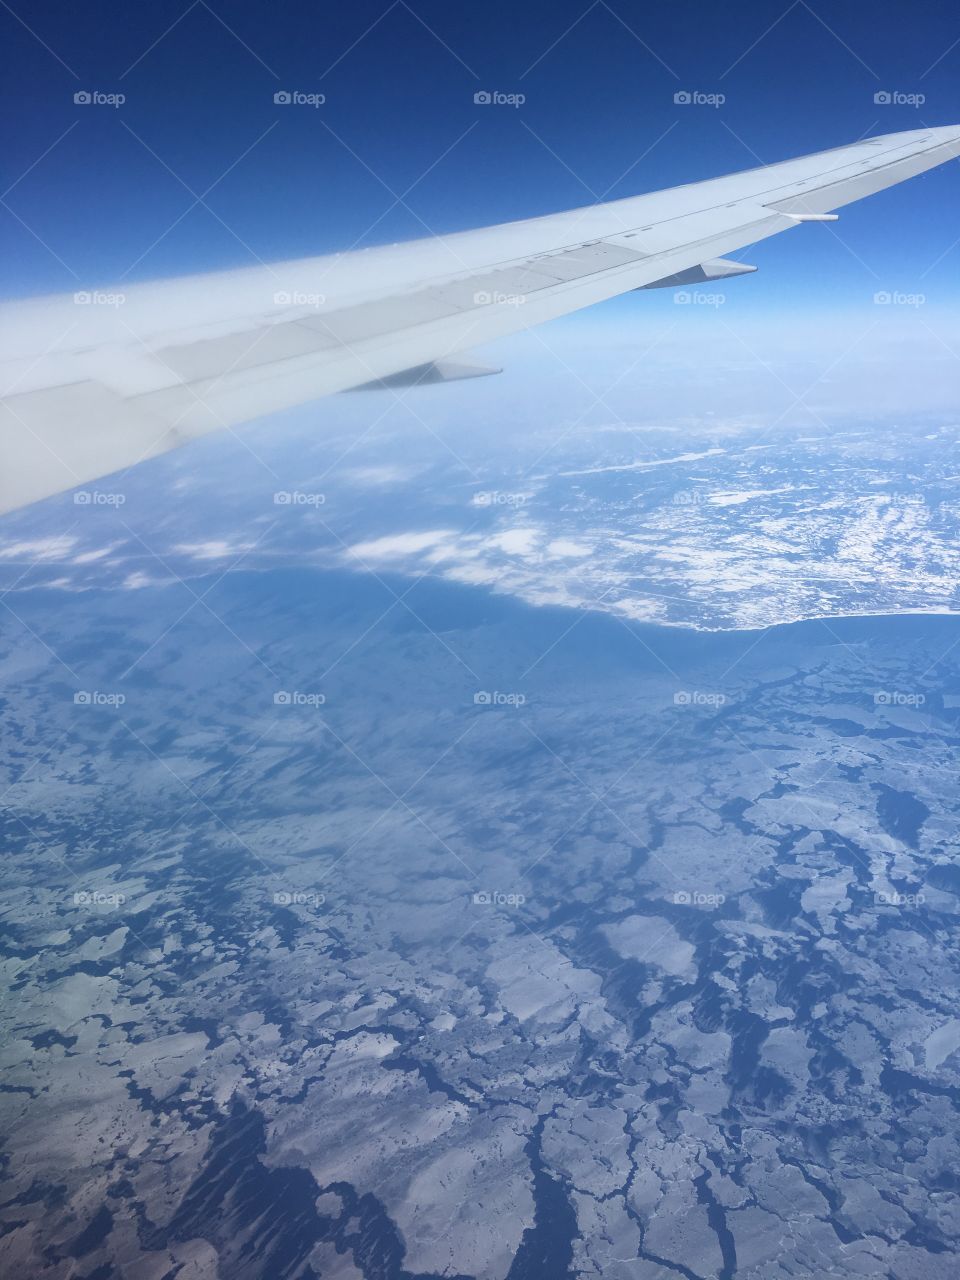 View of ice from the plane window.